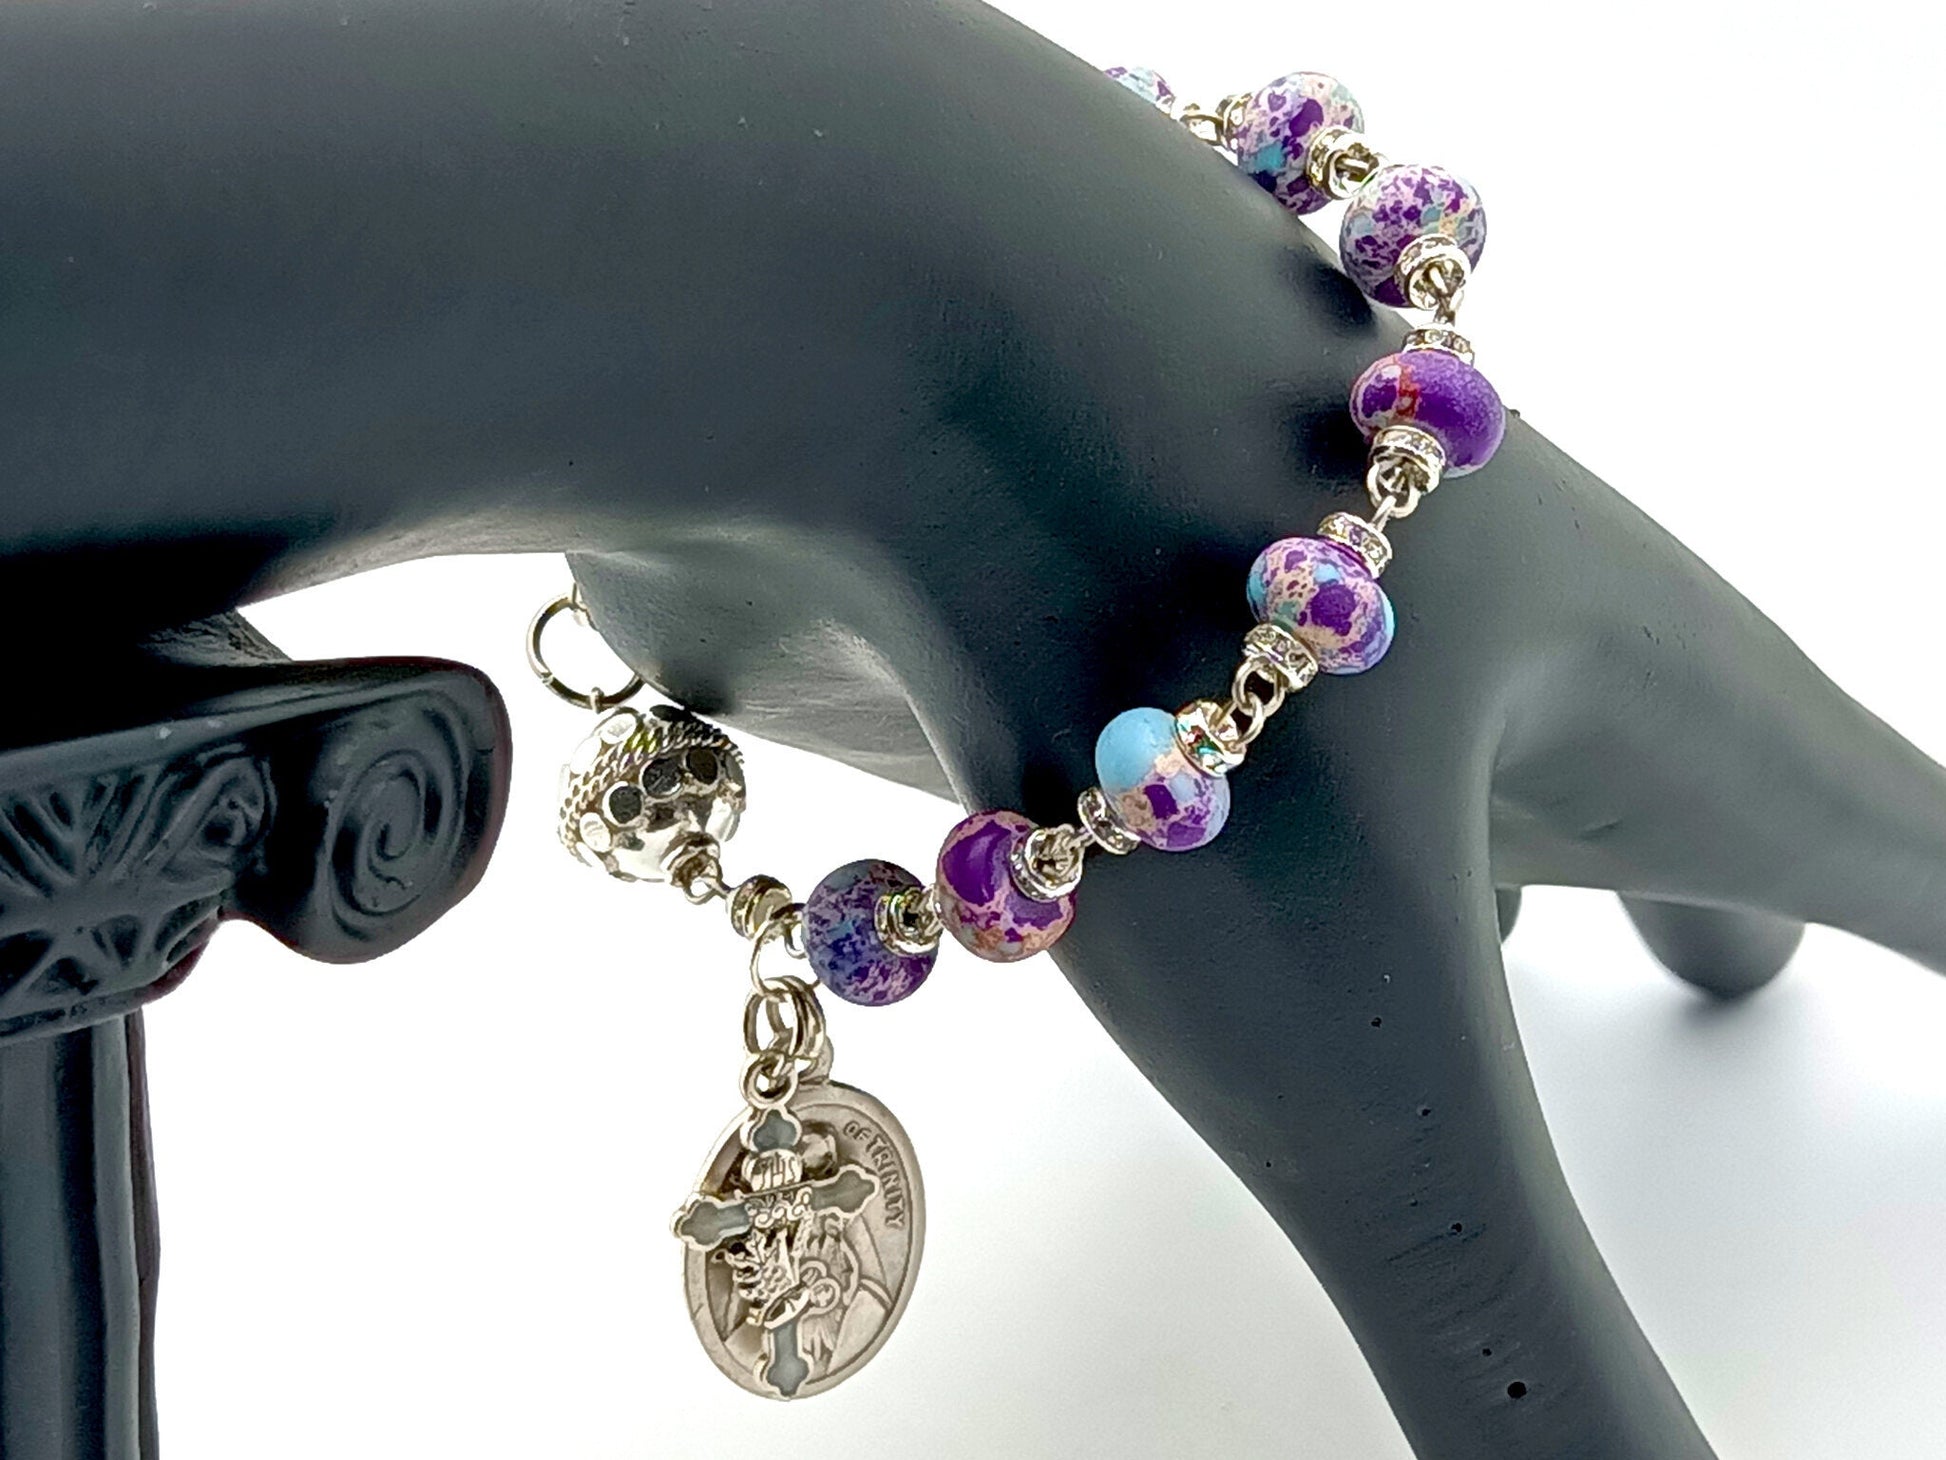 Our Lady of the Holy Trinity unique rosary beads single decade rosary bracelet with blue and purple gemstone beads, Holy communion enamel crucifix and Our Lady medal.